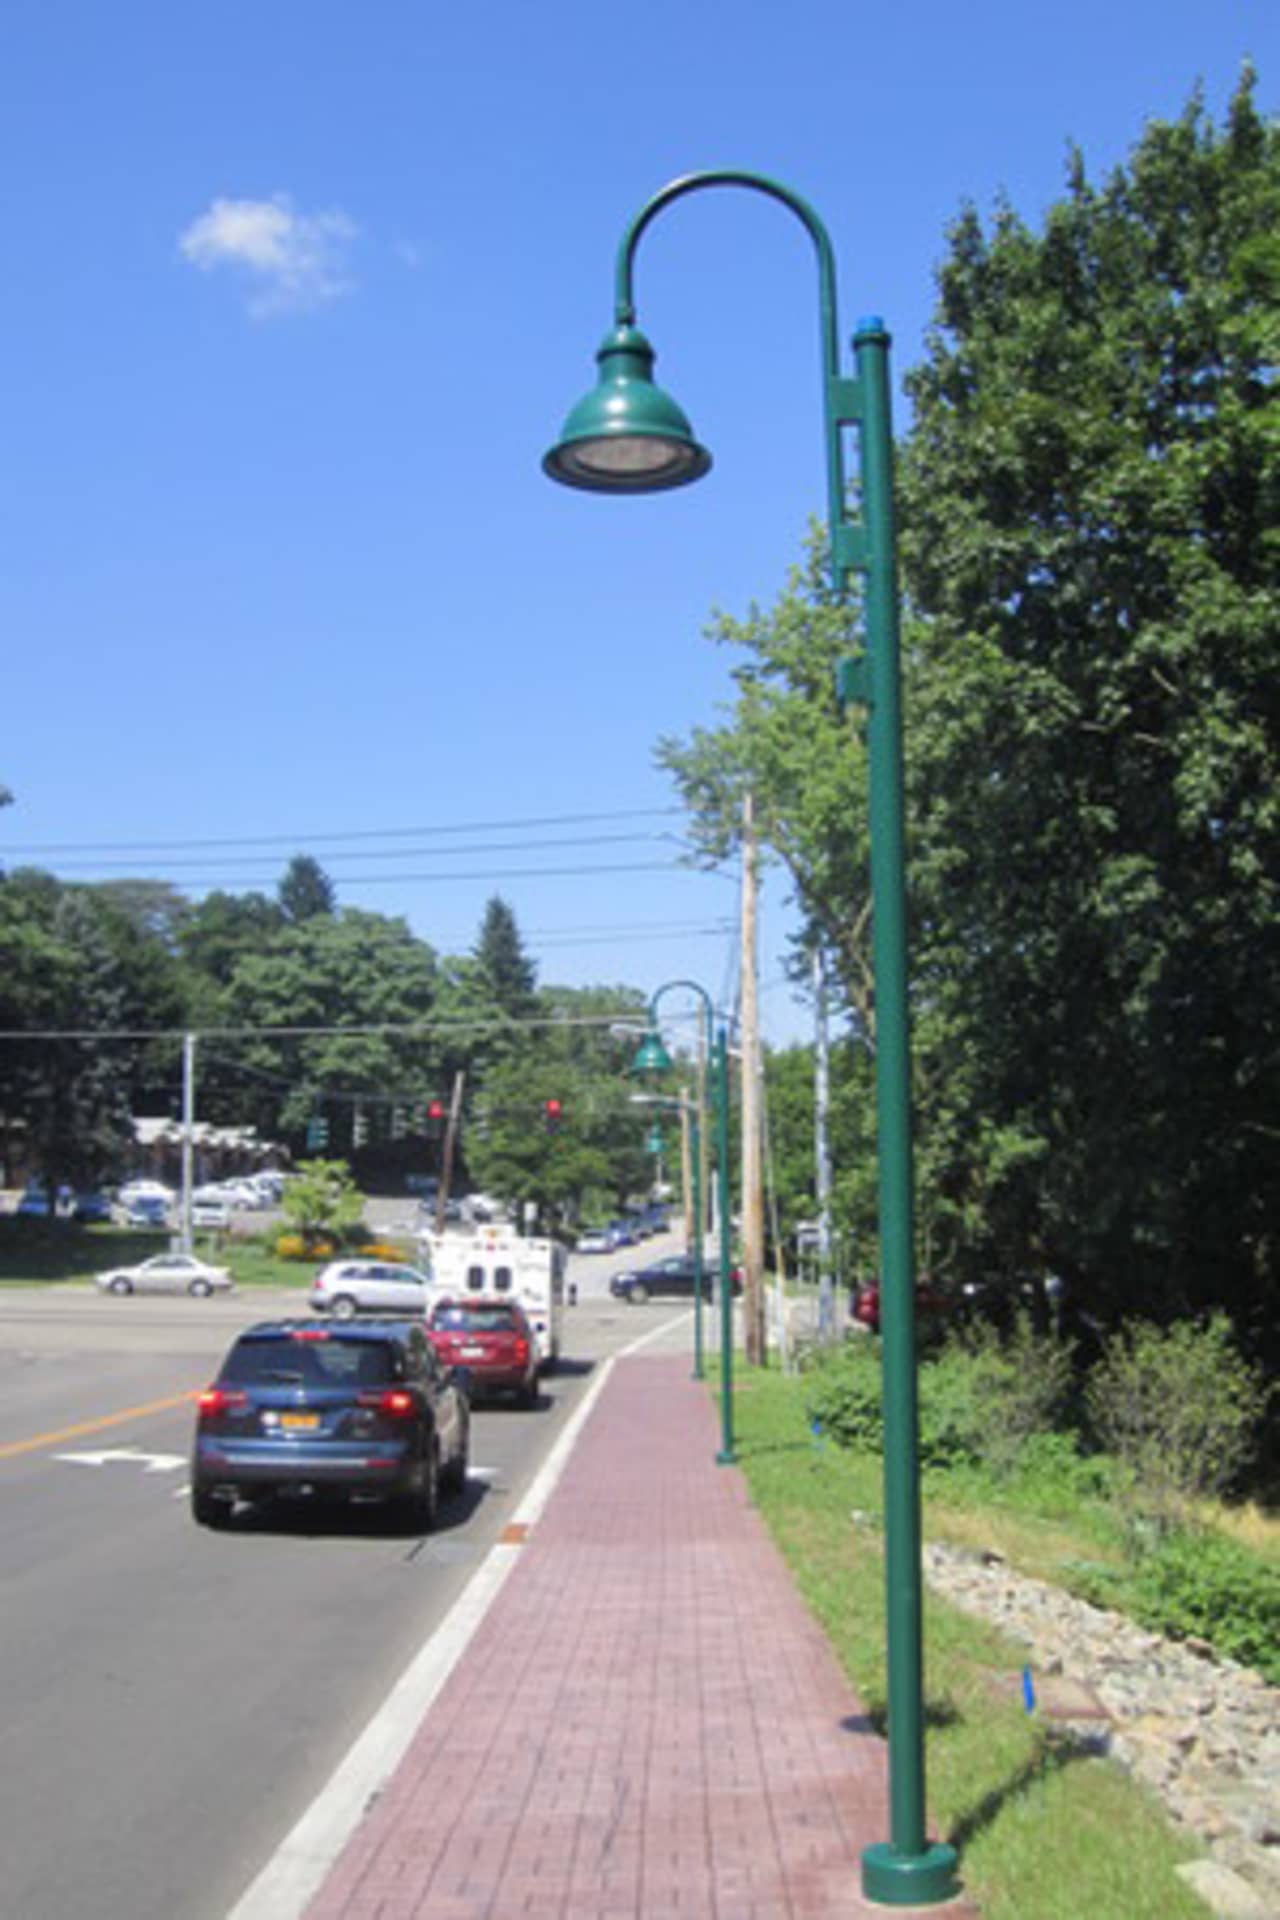 The Consolidated Edison work stoppage slowed work in Briarcliff Manor in July.